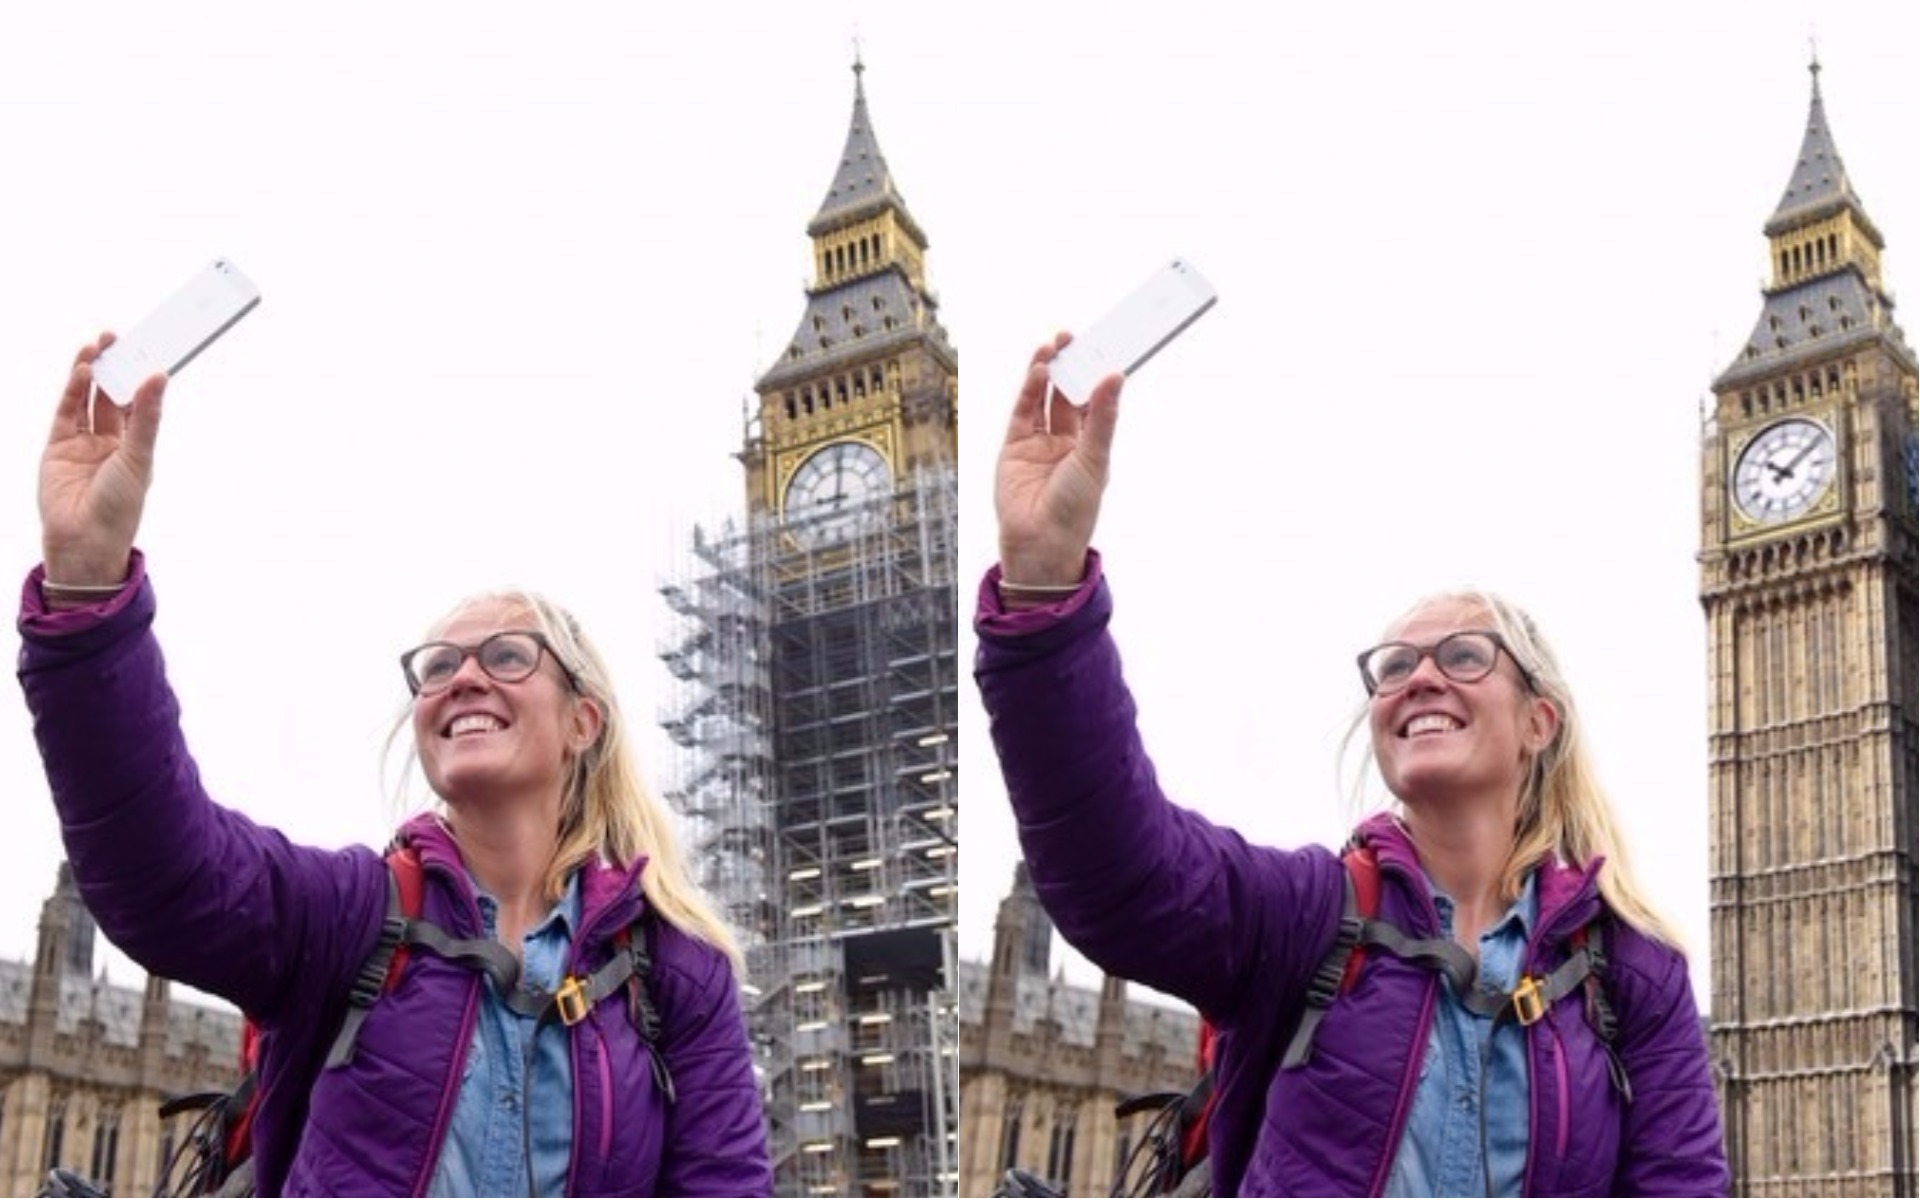 With and without the Big Ben scaffolding